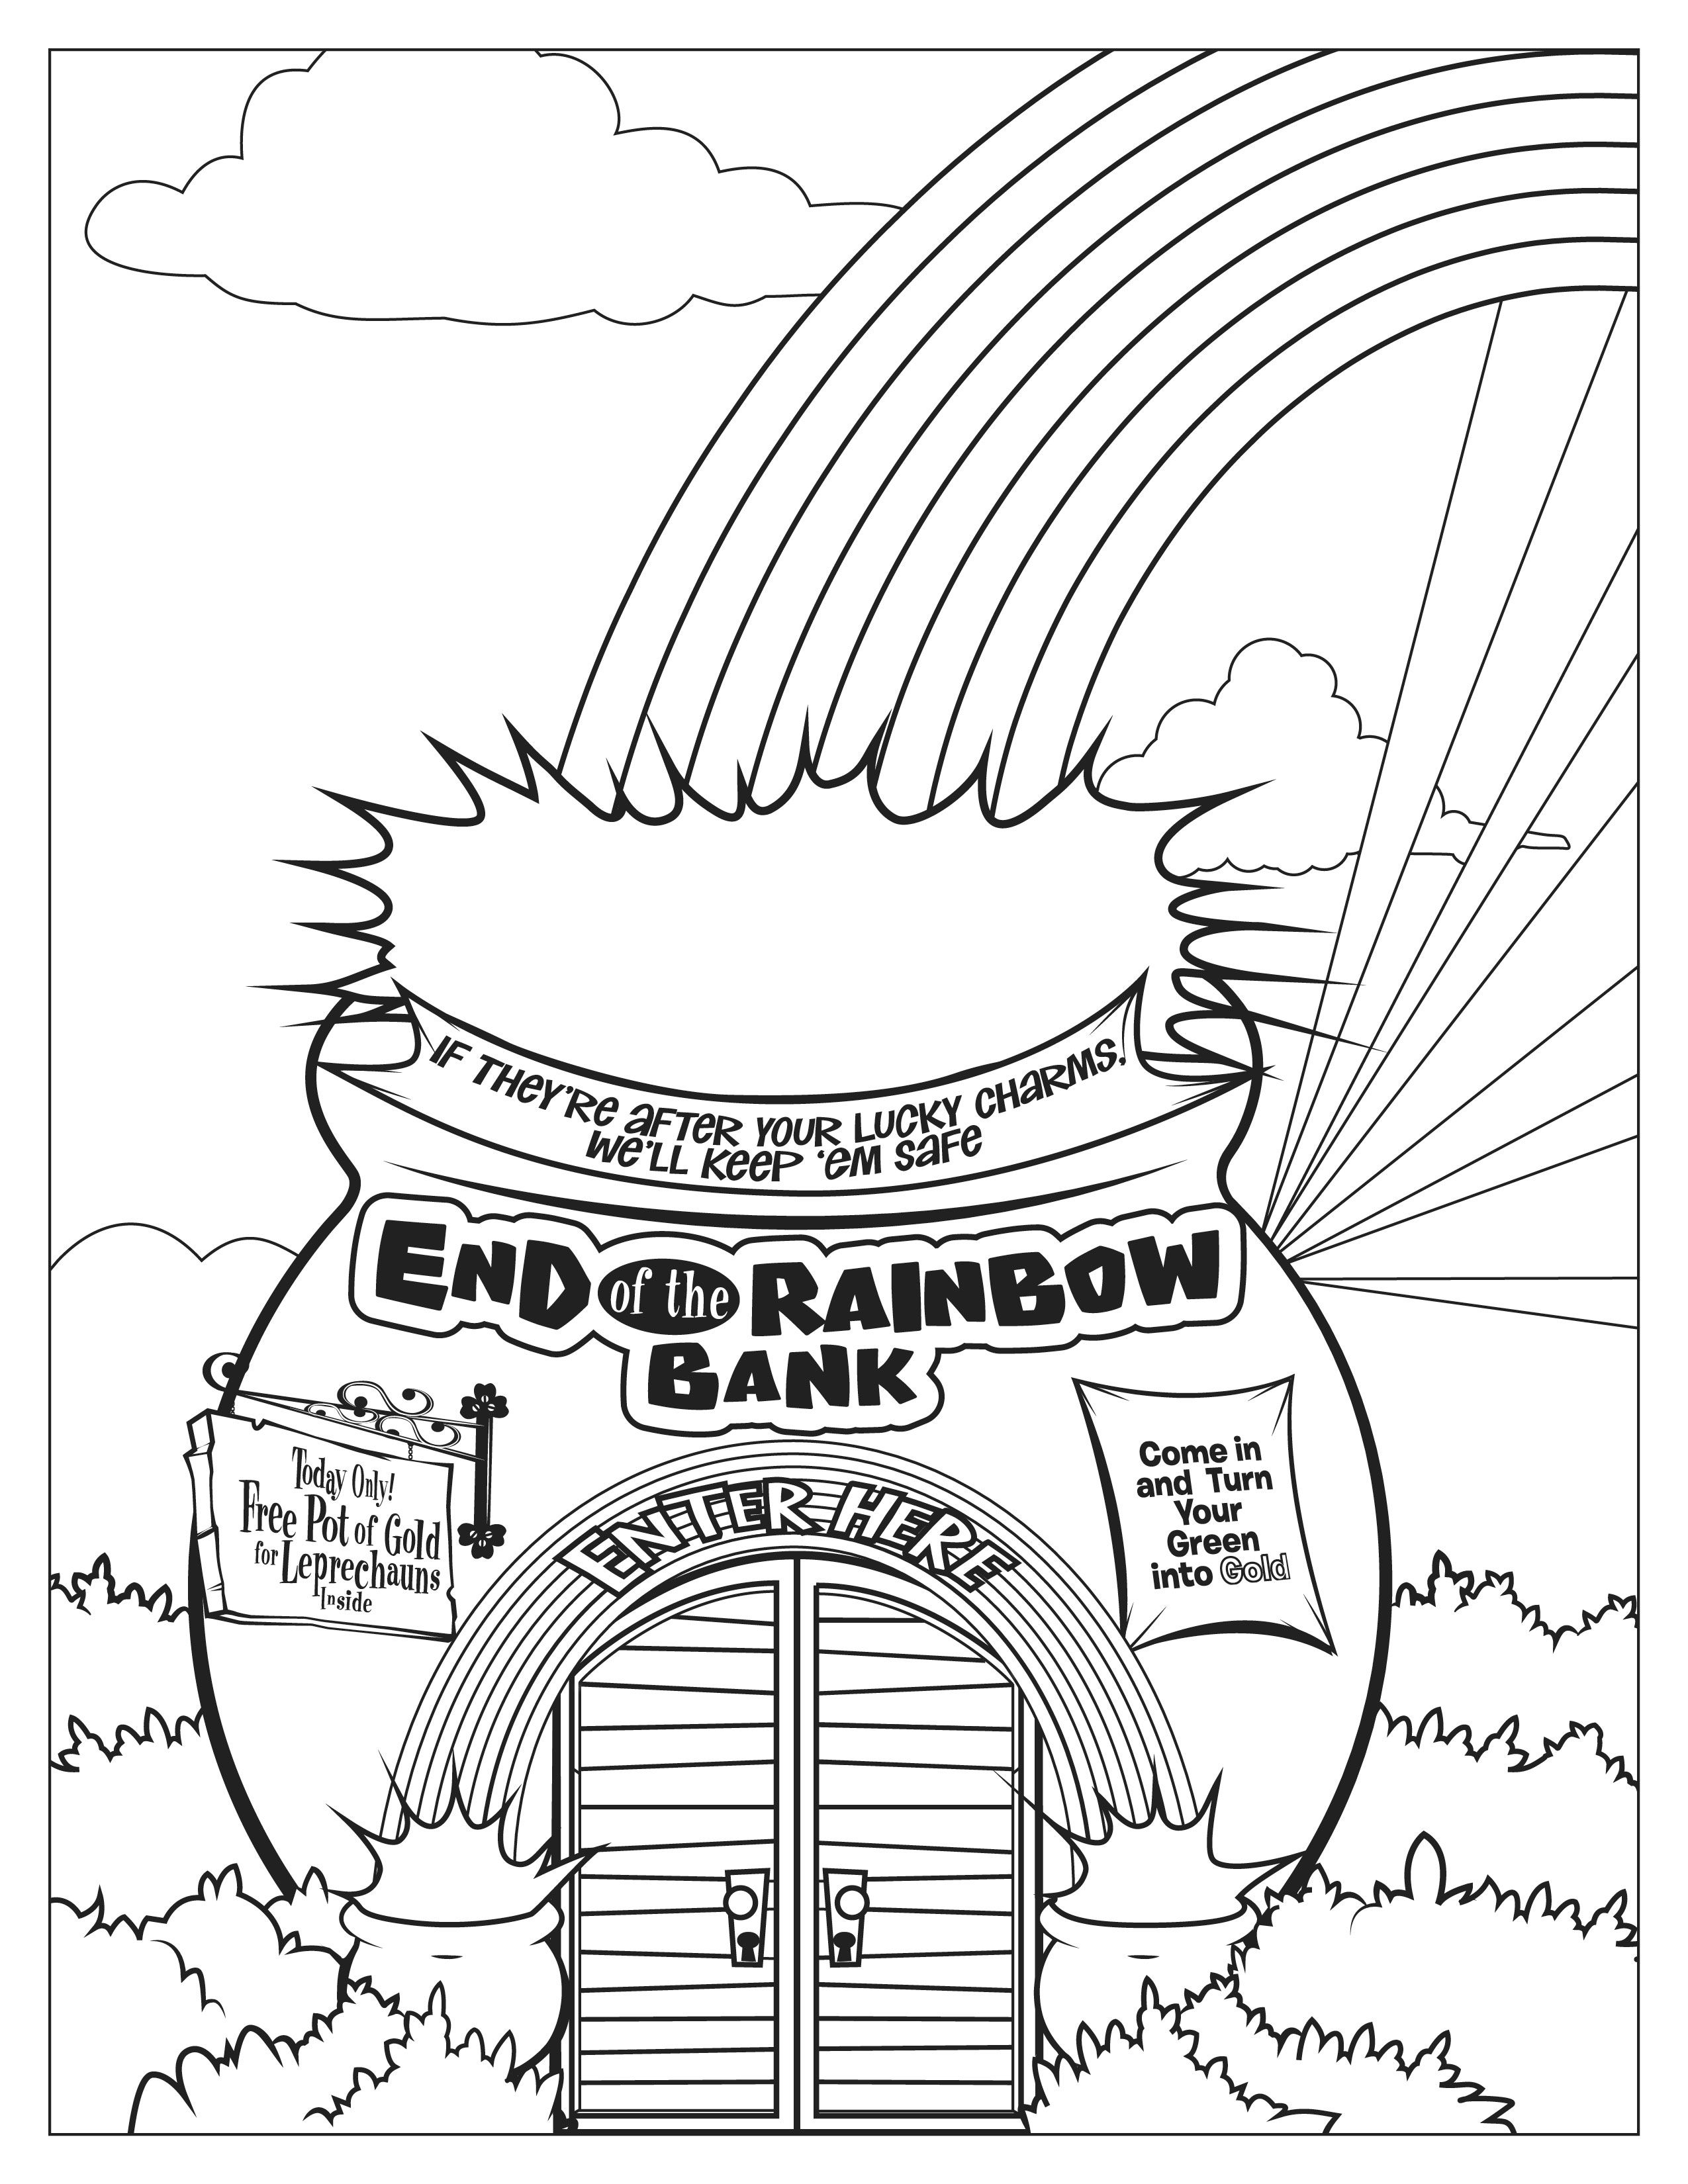 Lucky charms end of the rainbow bank coloring page coloring pages heart for kids free kindergarten worksheets